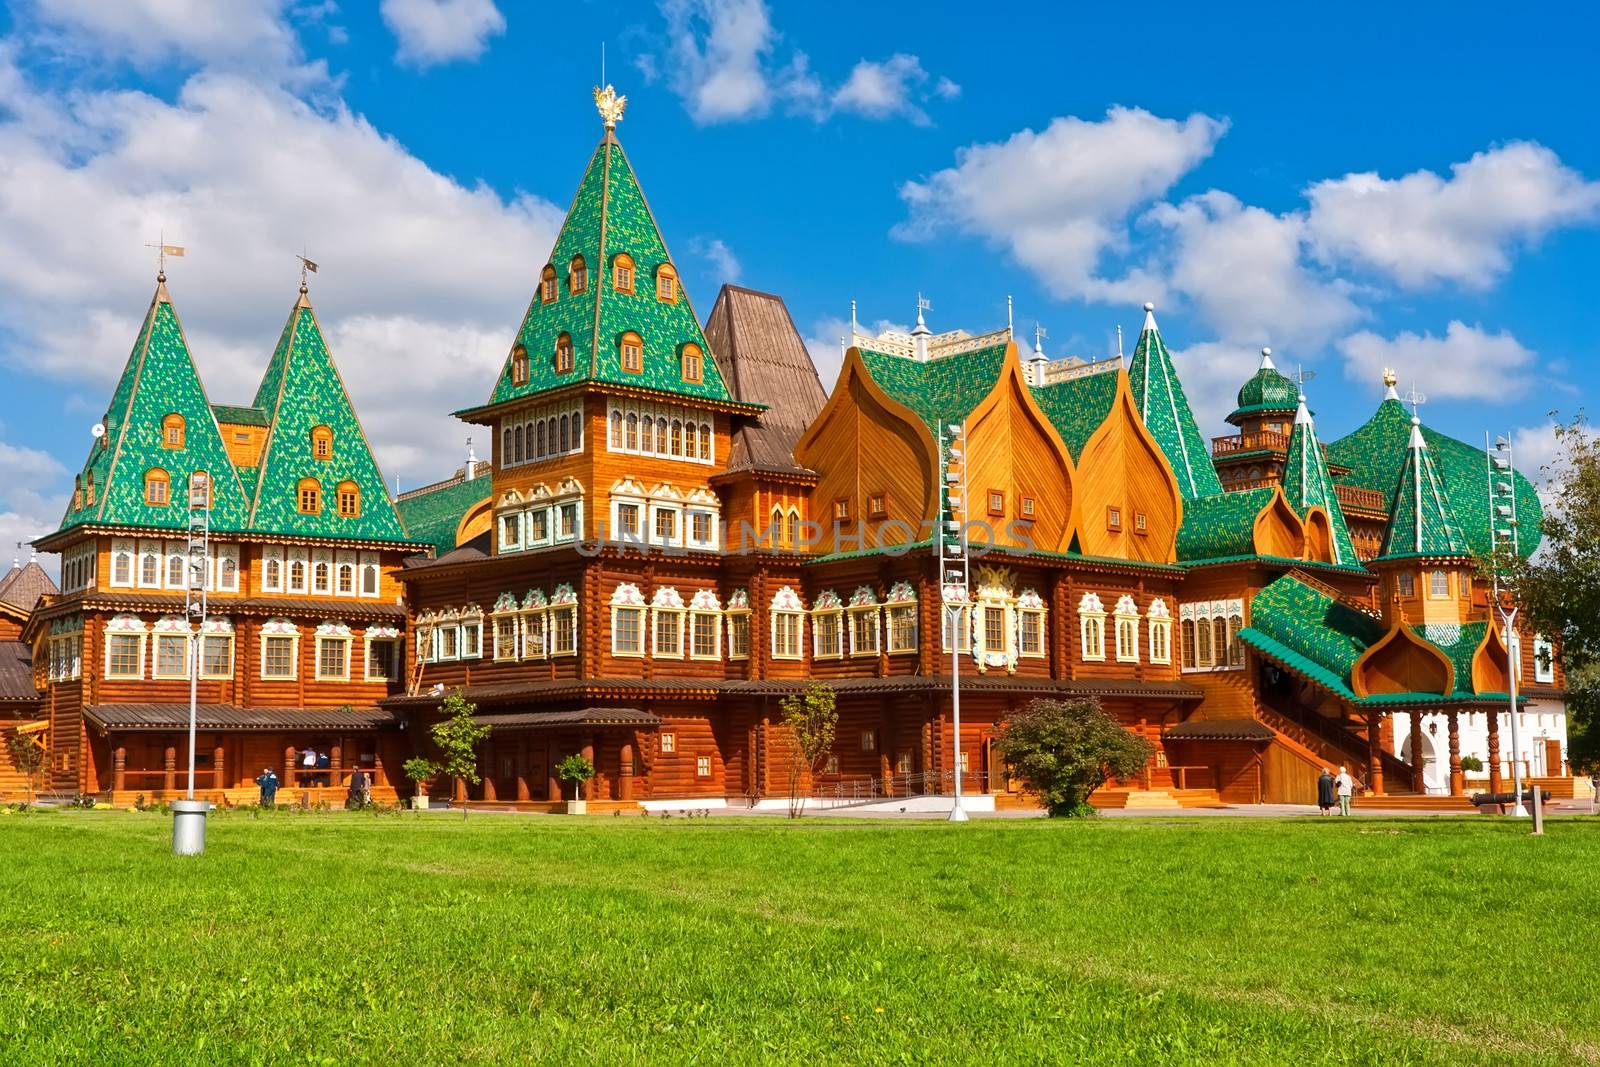 Wooden palace in Russia by sailorr